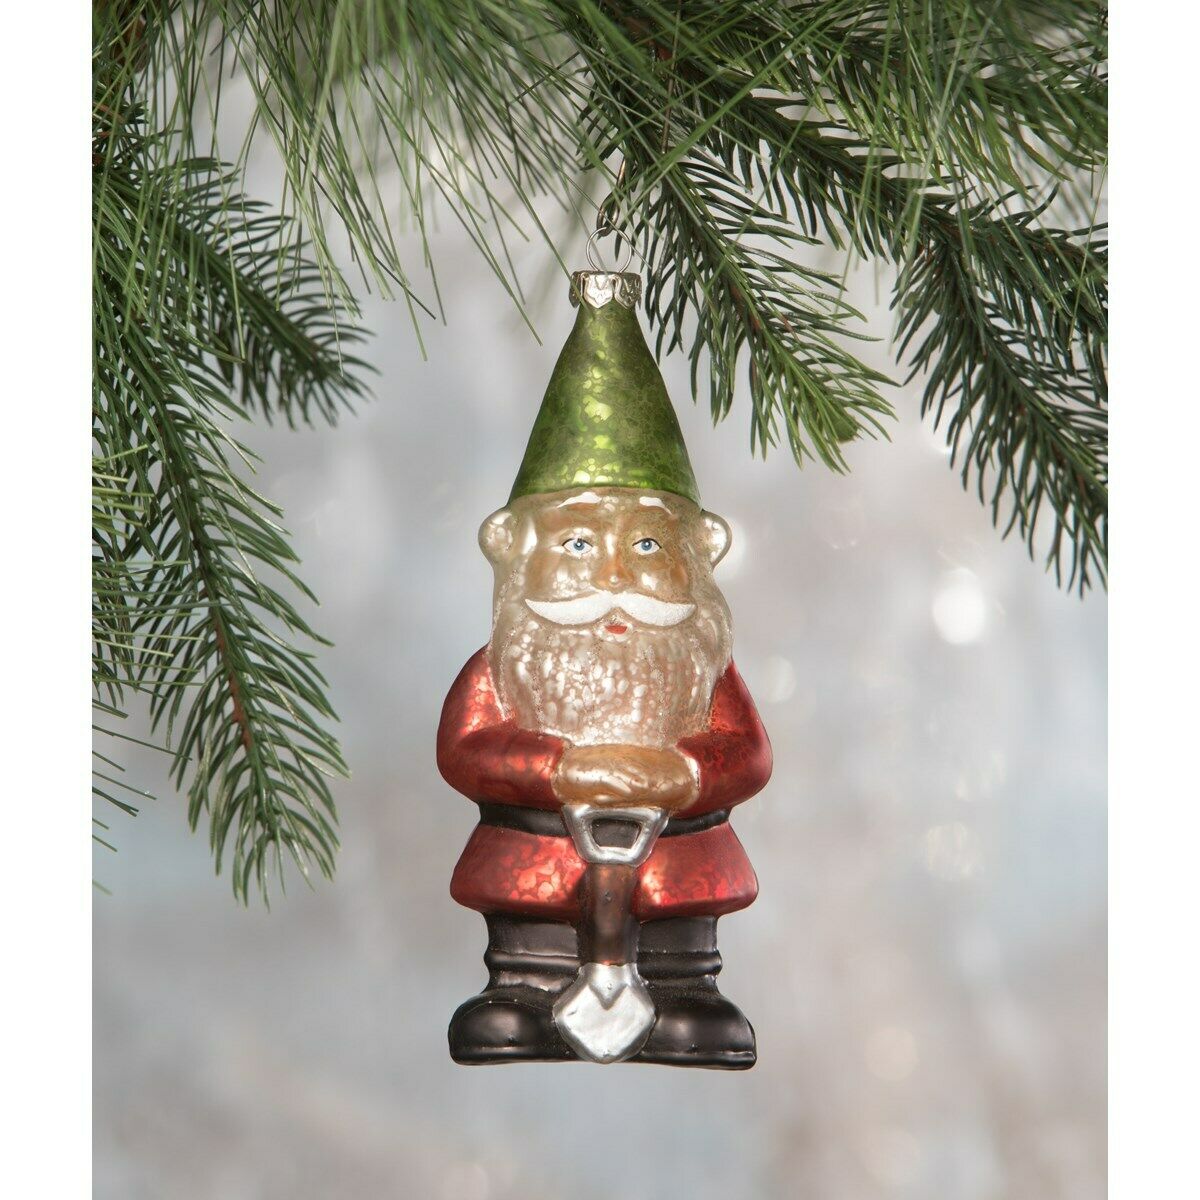 Bethany Lowe Christmas Gnome Mercury Glass Ornament lc9519 - The Primitive Pineapple Collection